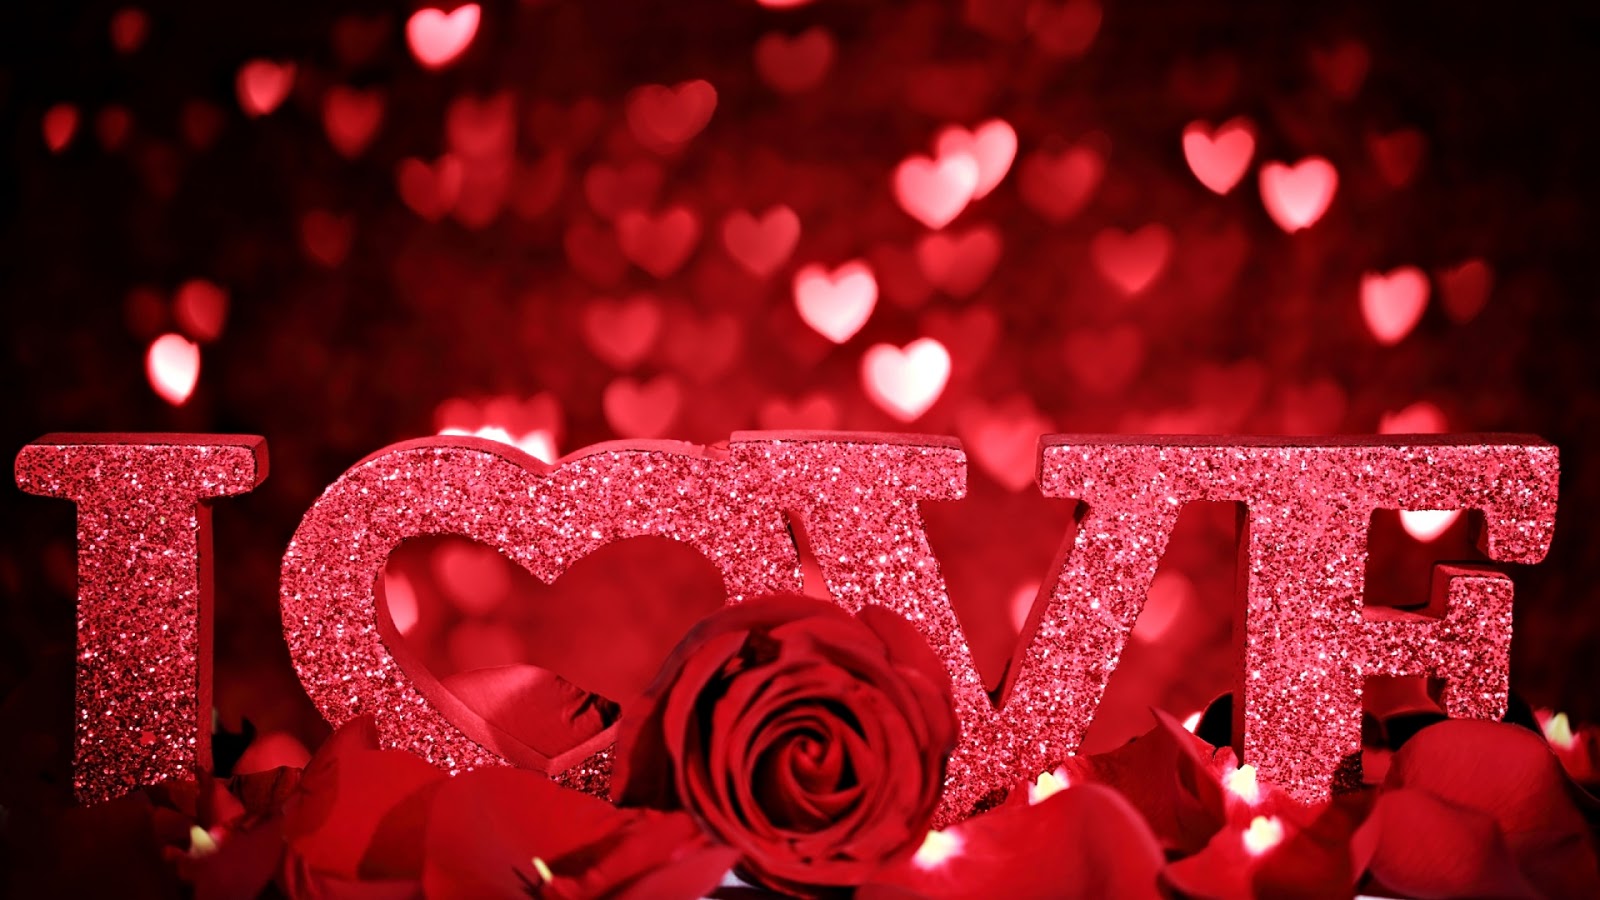 I Love You Heart Images and Desktop Wallpapers Love Pictures